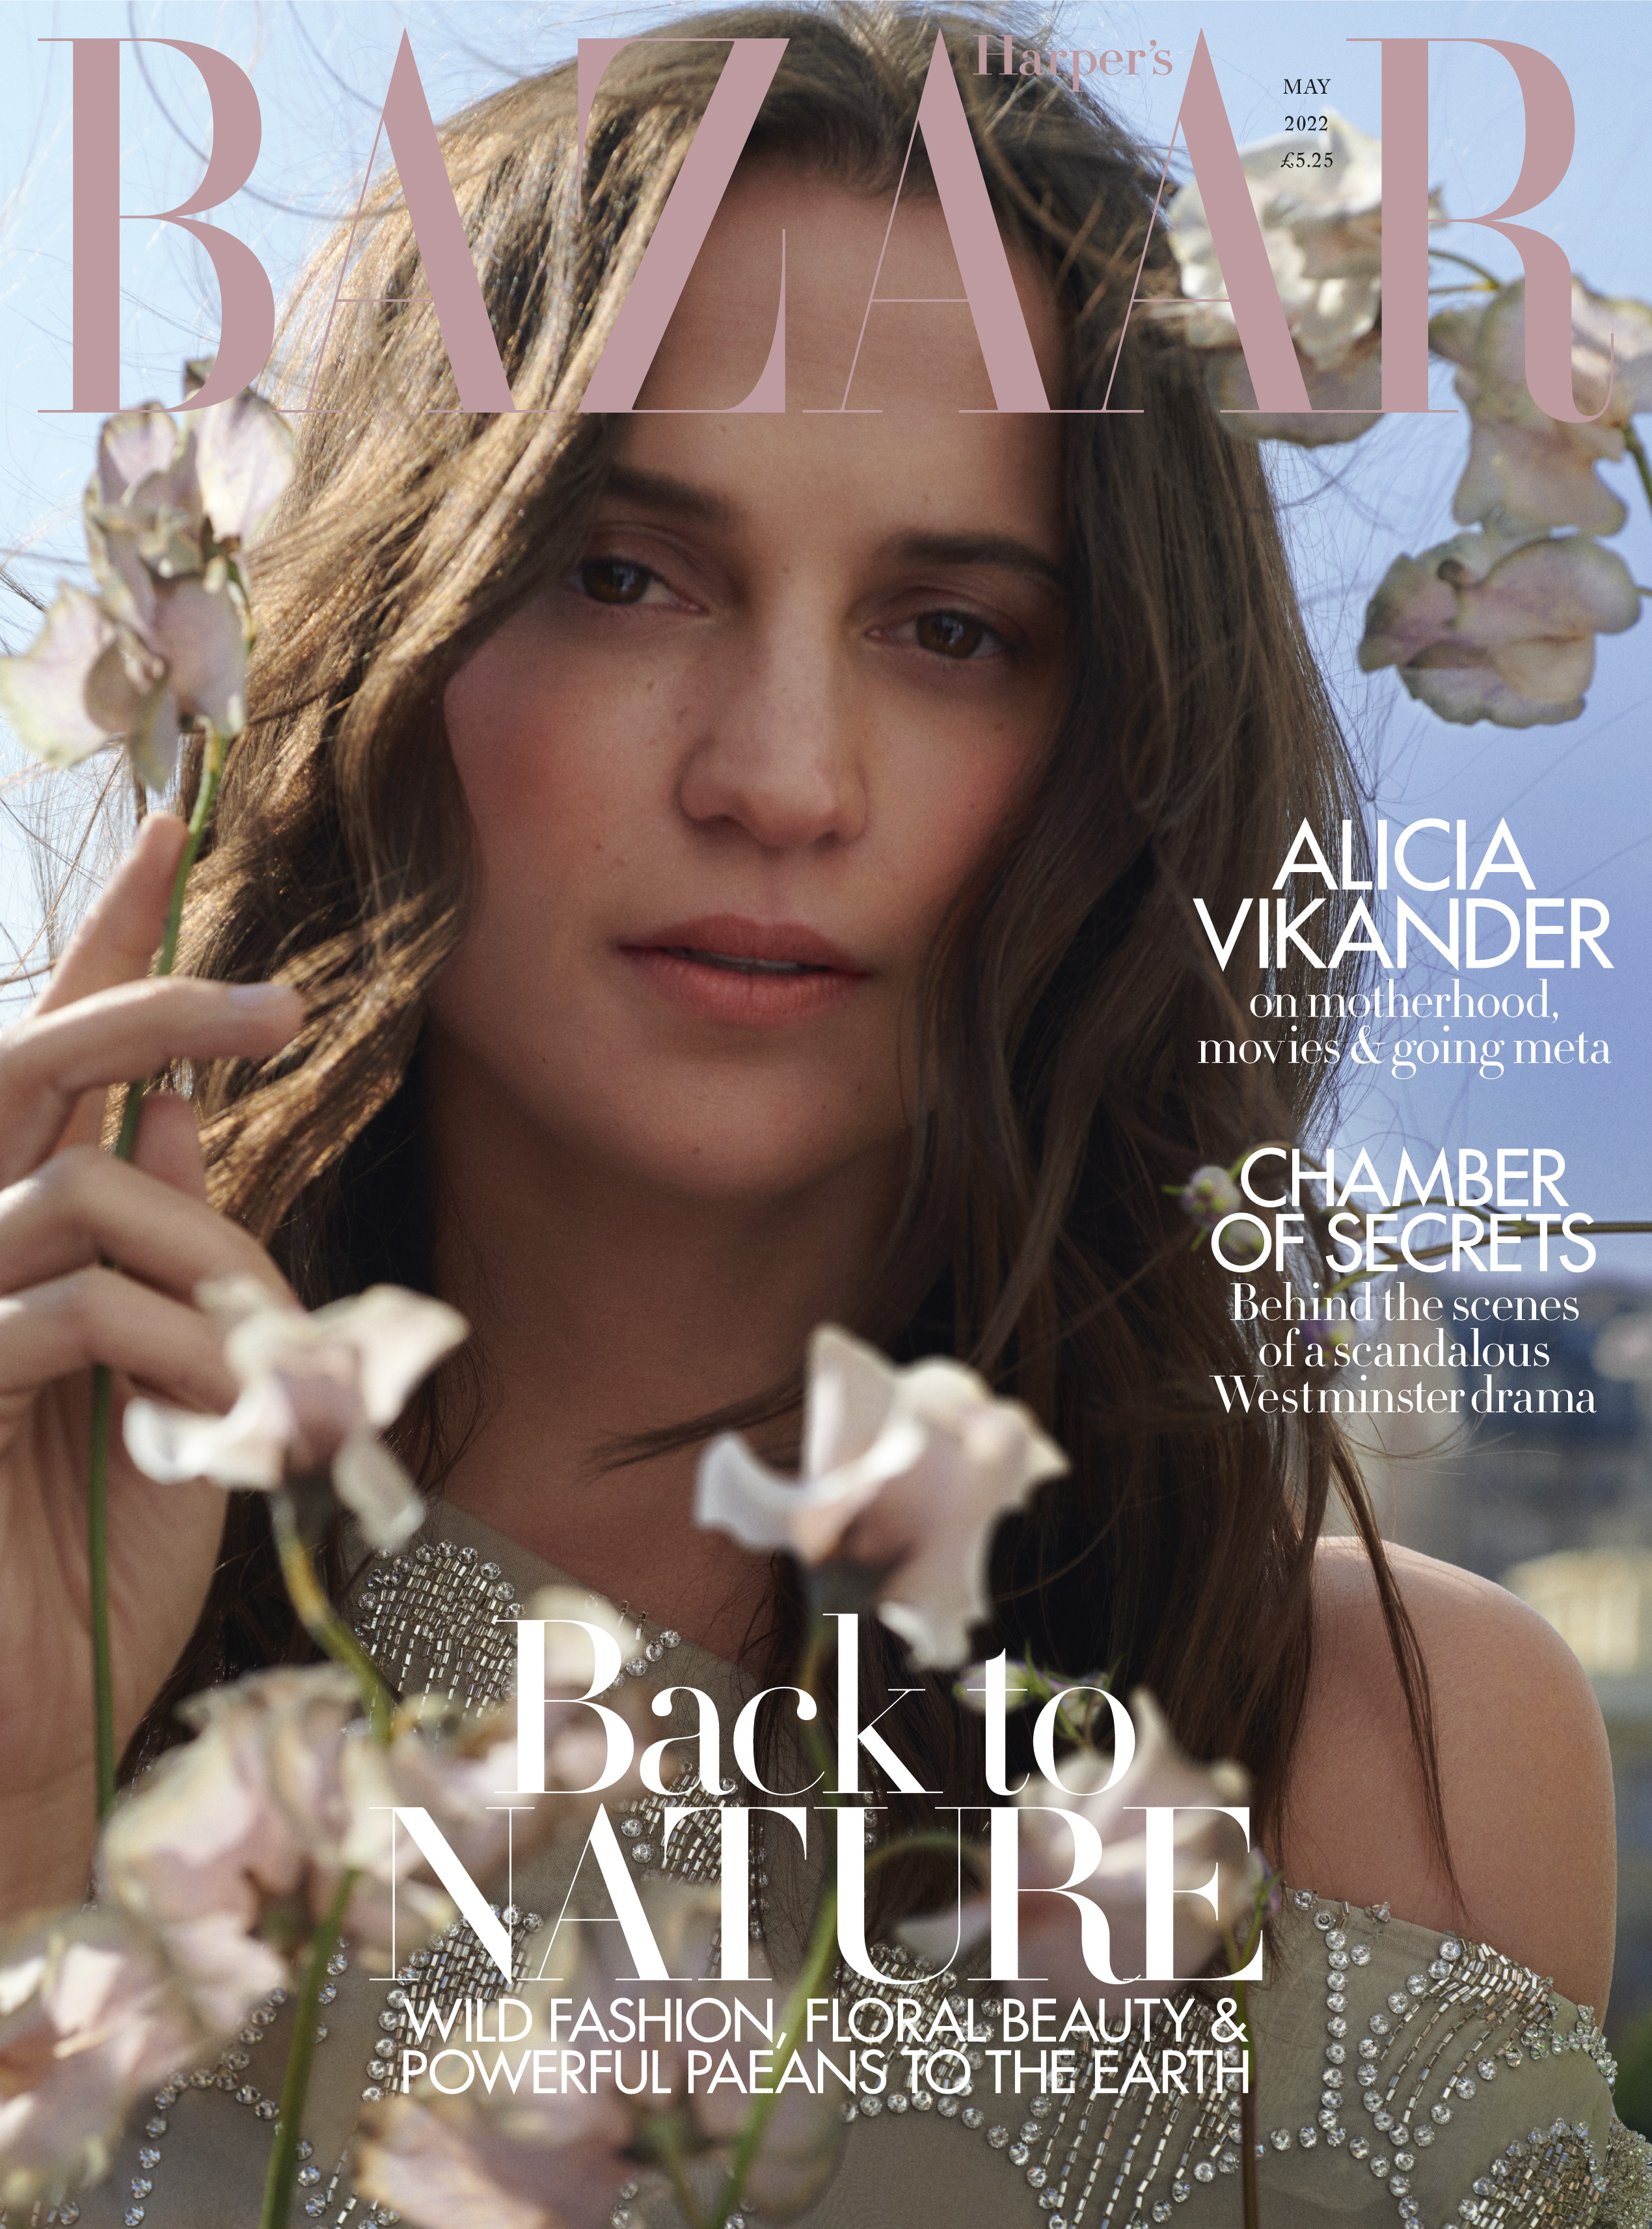 Alicia Vikander on Her Oscar Win and Her First Vogue Cover